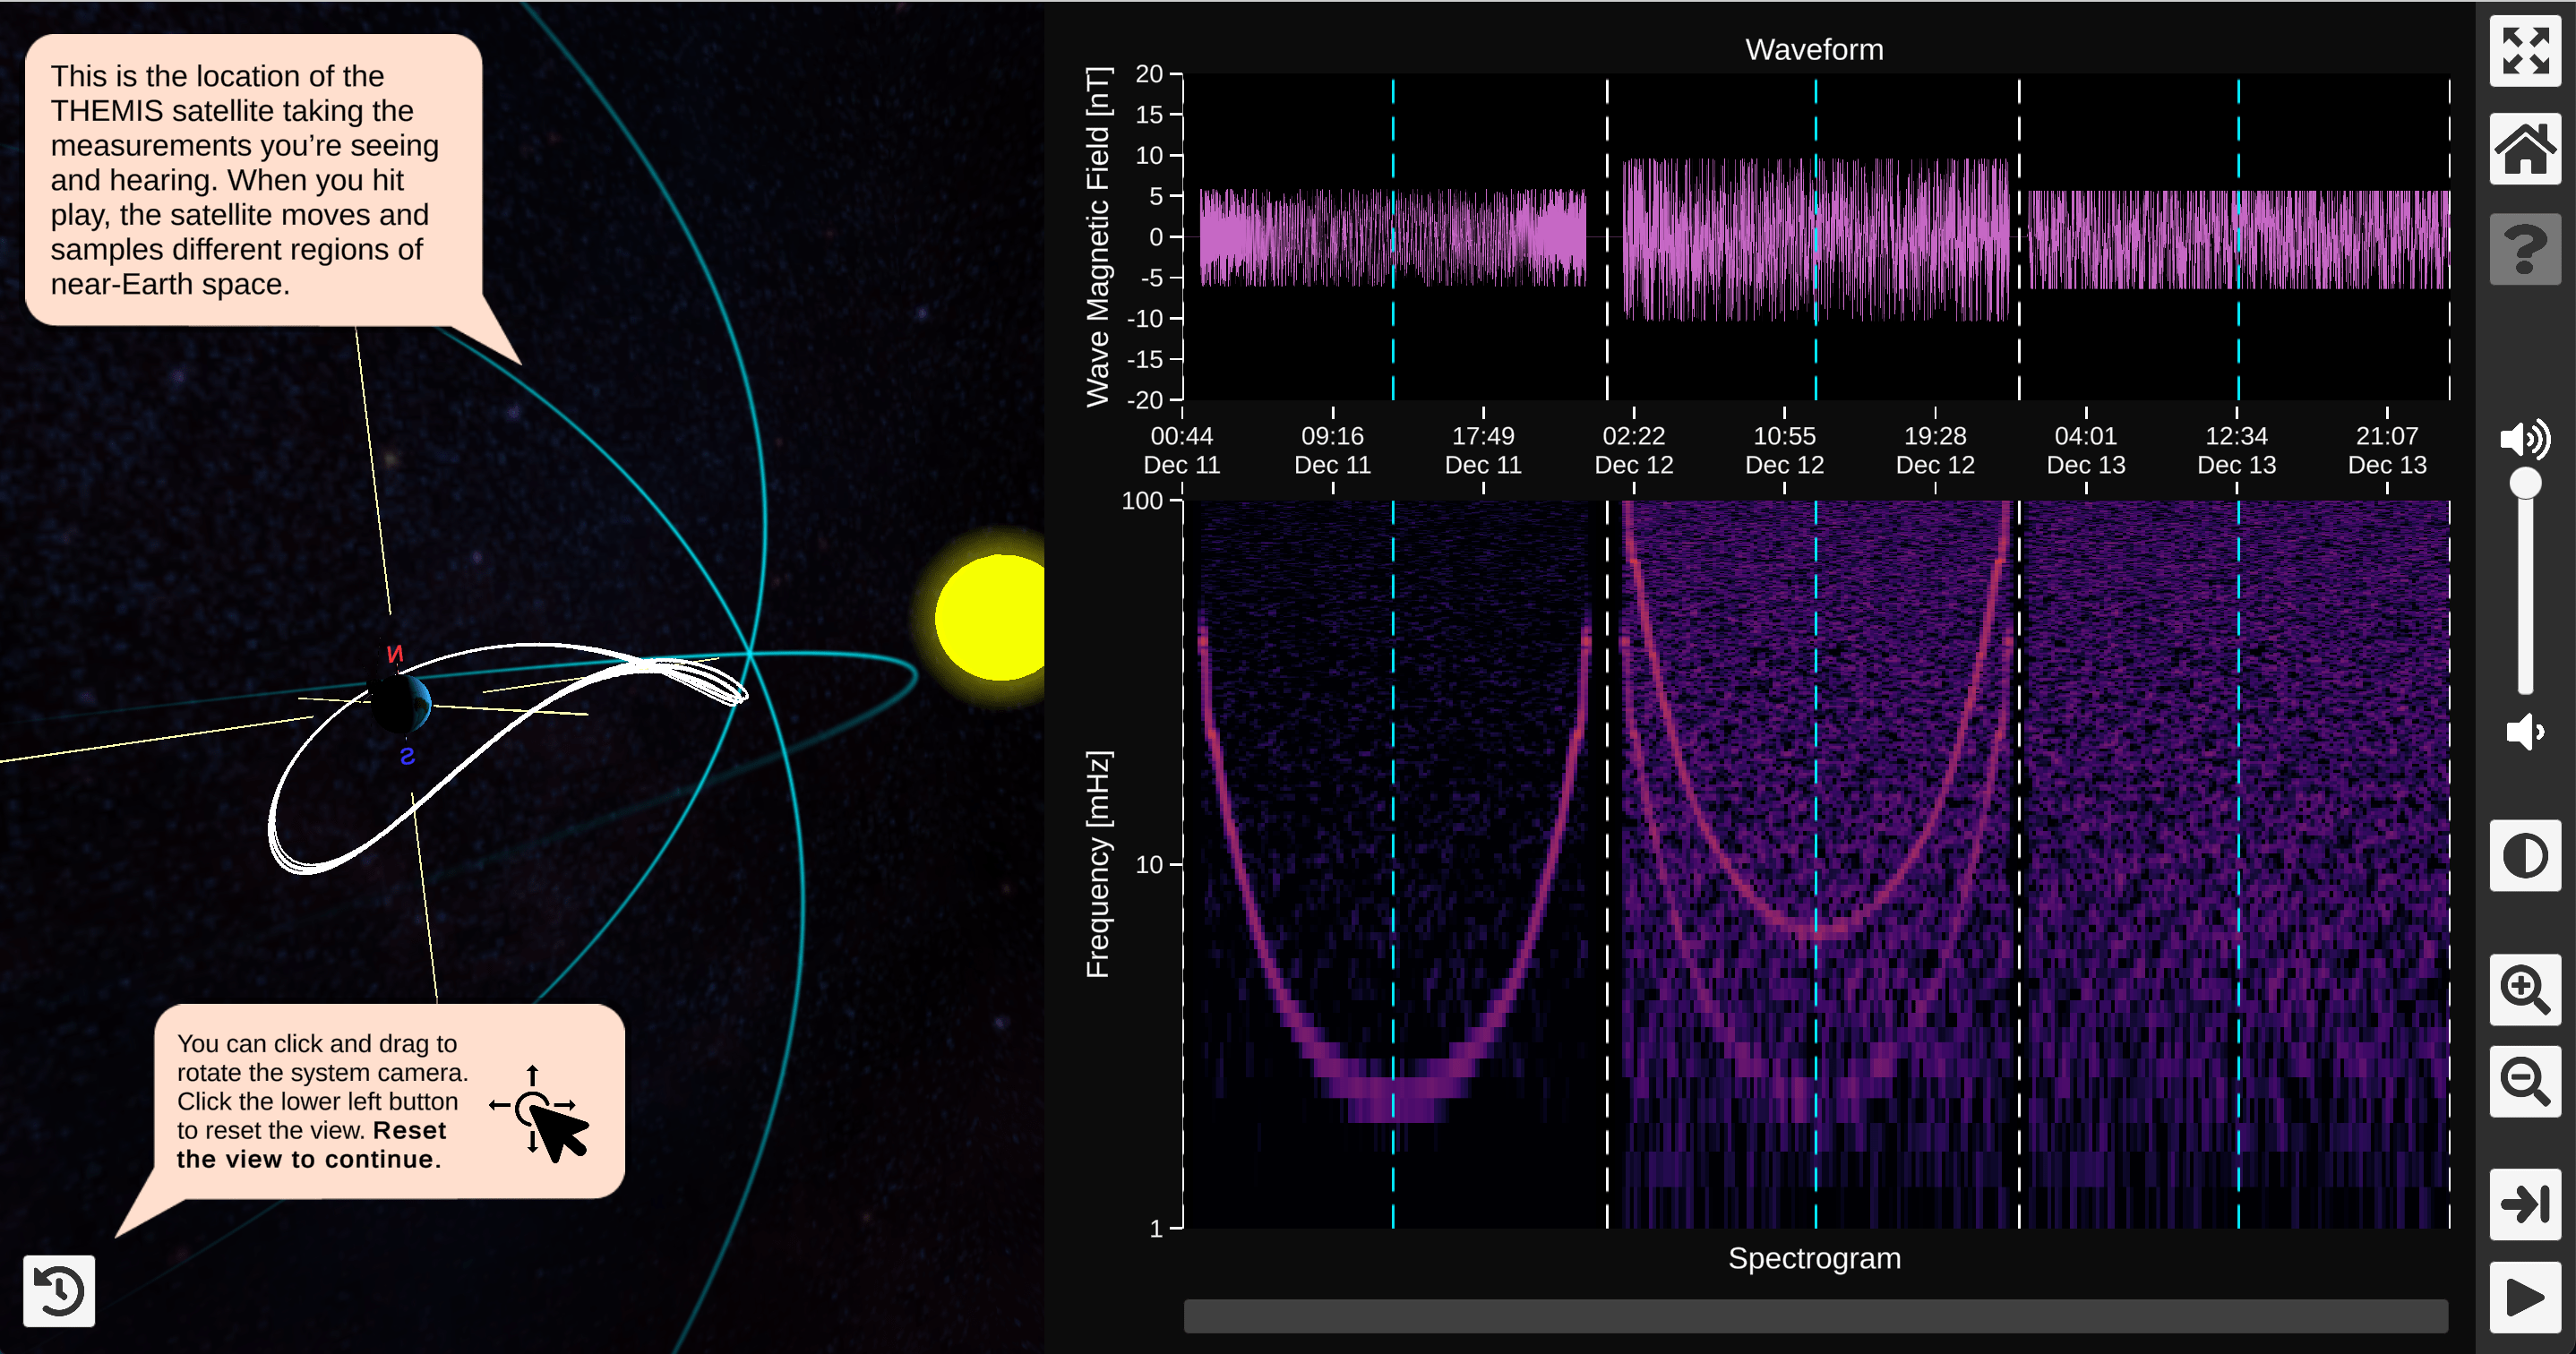 The project interface has a divided screen, all on a black field. On the left, we see Earth surrounded by the elliptical path THEMIS spacecraft travel, depicted in bright white. The Sun, which appears as a bright yellow circle, is outside of this path and to the right. On the right hand side of the interface, we see two graphs. The graph on top visualizes the waveform, which appears as a highly jagged purple line that oscillates rapidly between -6 and 6 nT (nanoteslas) through a roughly three-day period of time. Below this graph and sharing the same x-axis of time we see the spectrogram of the sound, which appears to have three distinct parts. The first shows one large “u” shaped line in dark pink. The second shows the same “U” shaped line with a second, pinker U-shaped line above it, with purple splotches of data noise behind. The third shows just the purple splotches of noise.